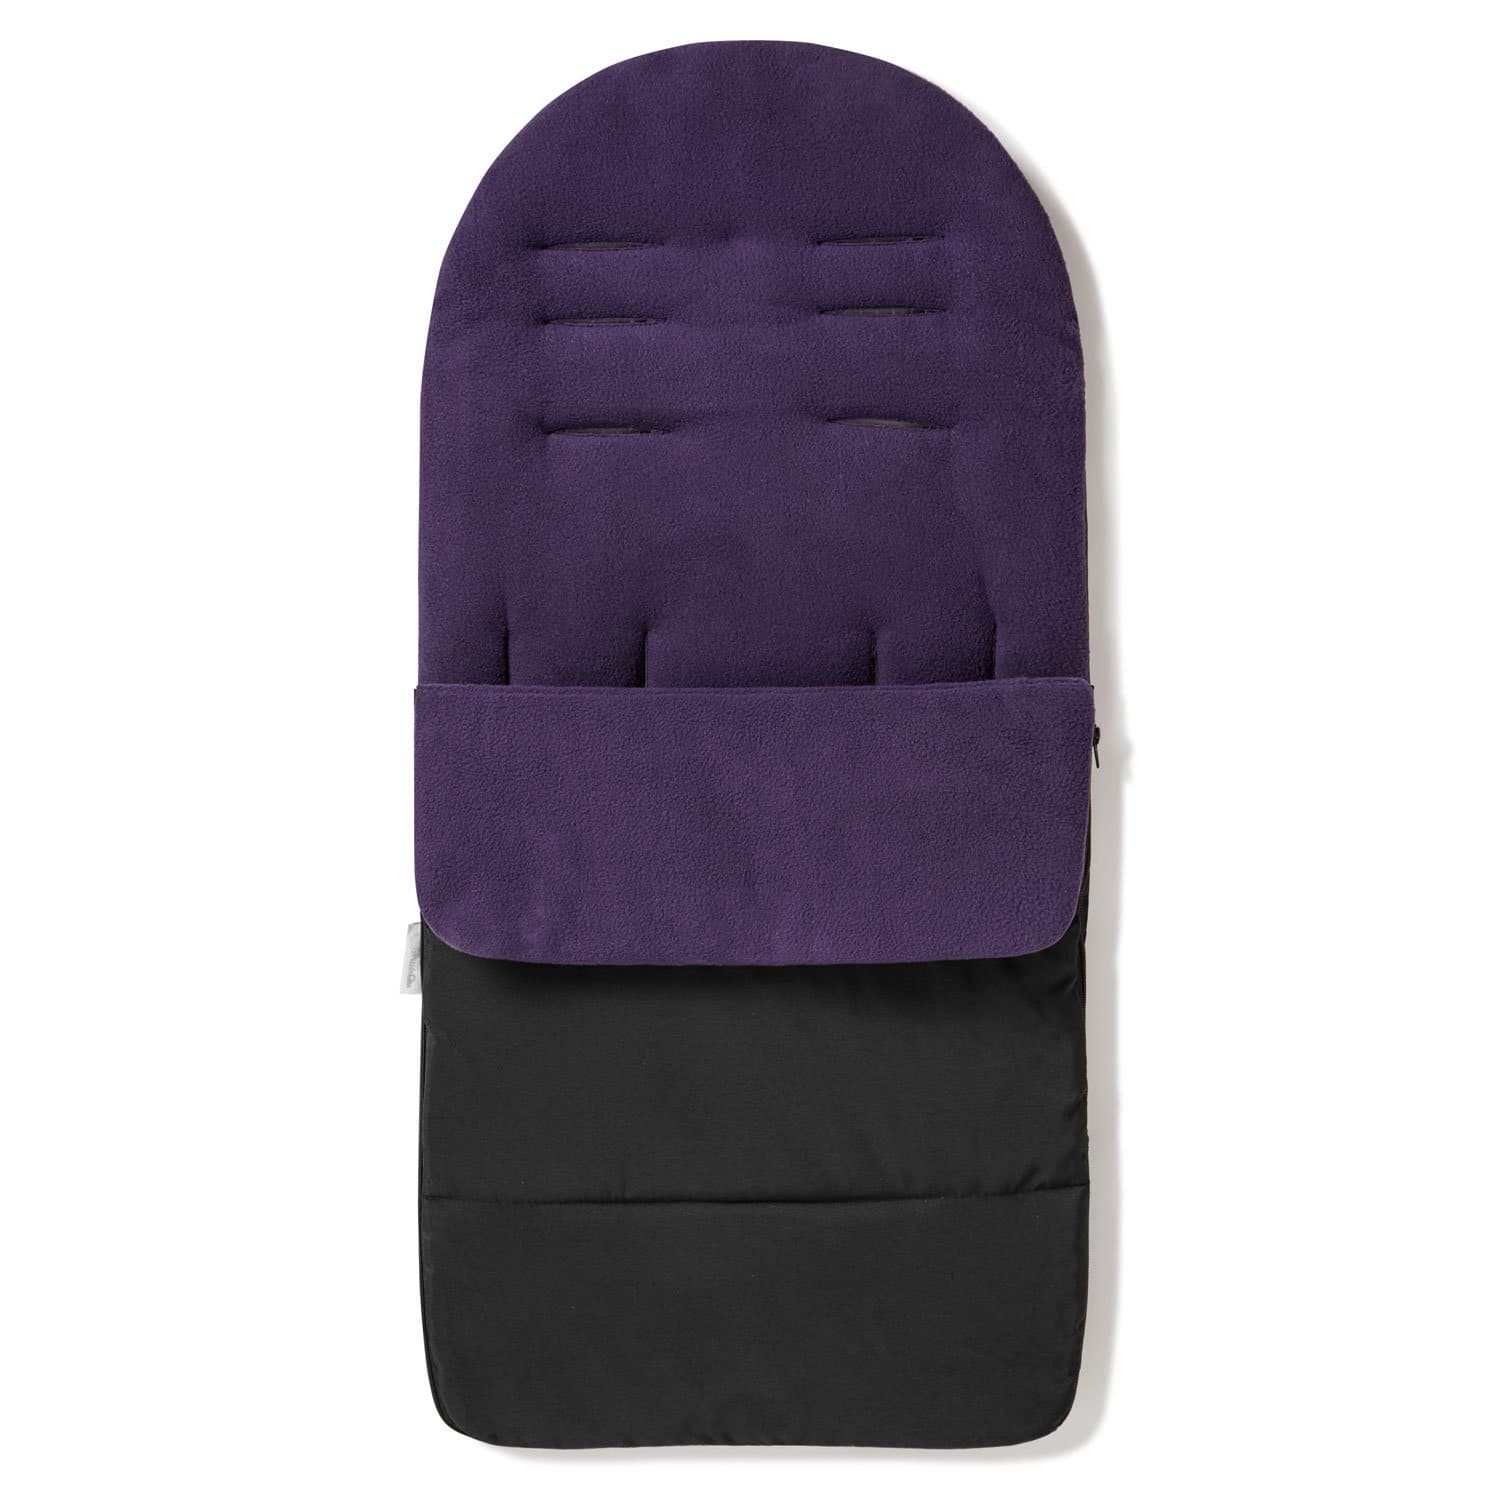 Premium Footmuff / Cosy Toes Compatible with Red Castle - Plum Purple / Fits All Models | For Your Little One